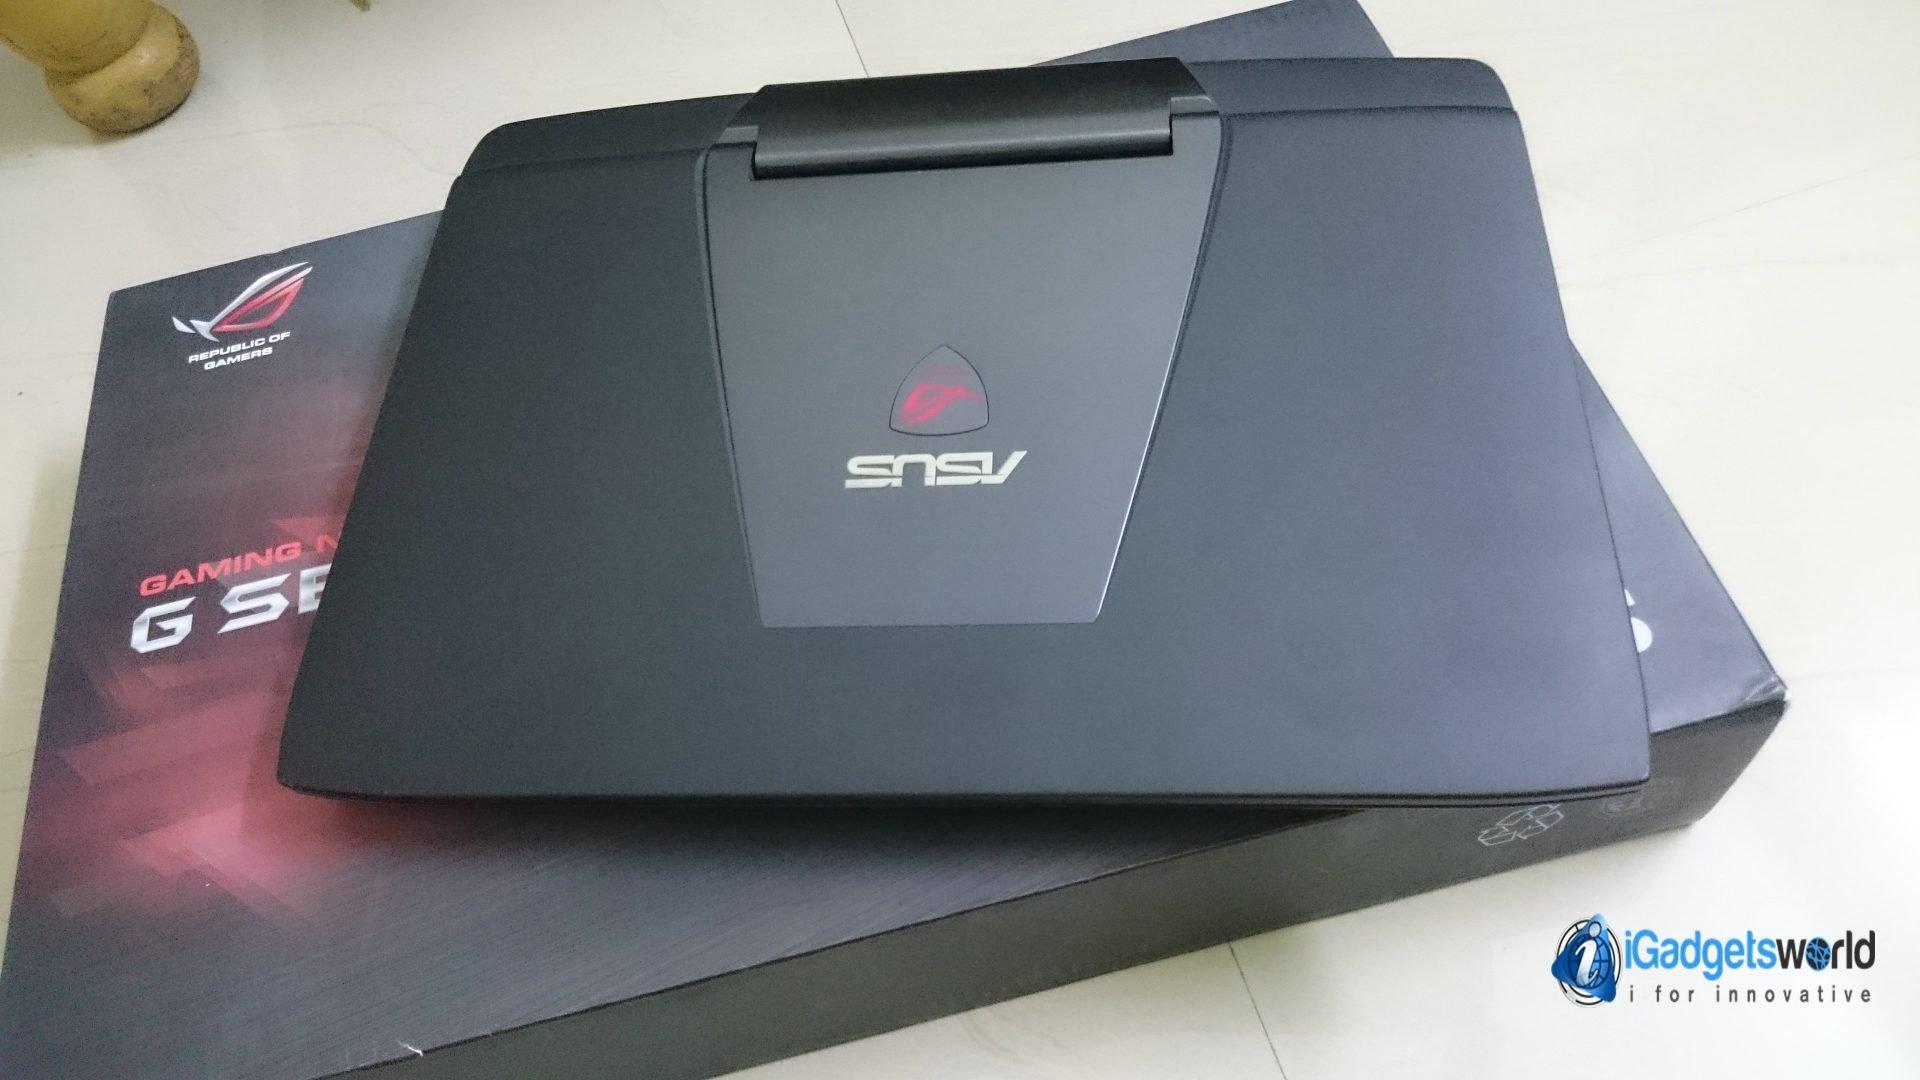 Asus ROG G751J Review: A Slightly Overpriced Ultra High-End Gaming Laptop - 7